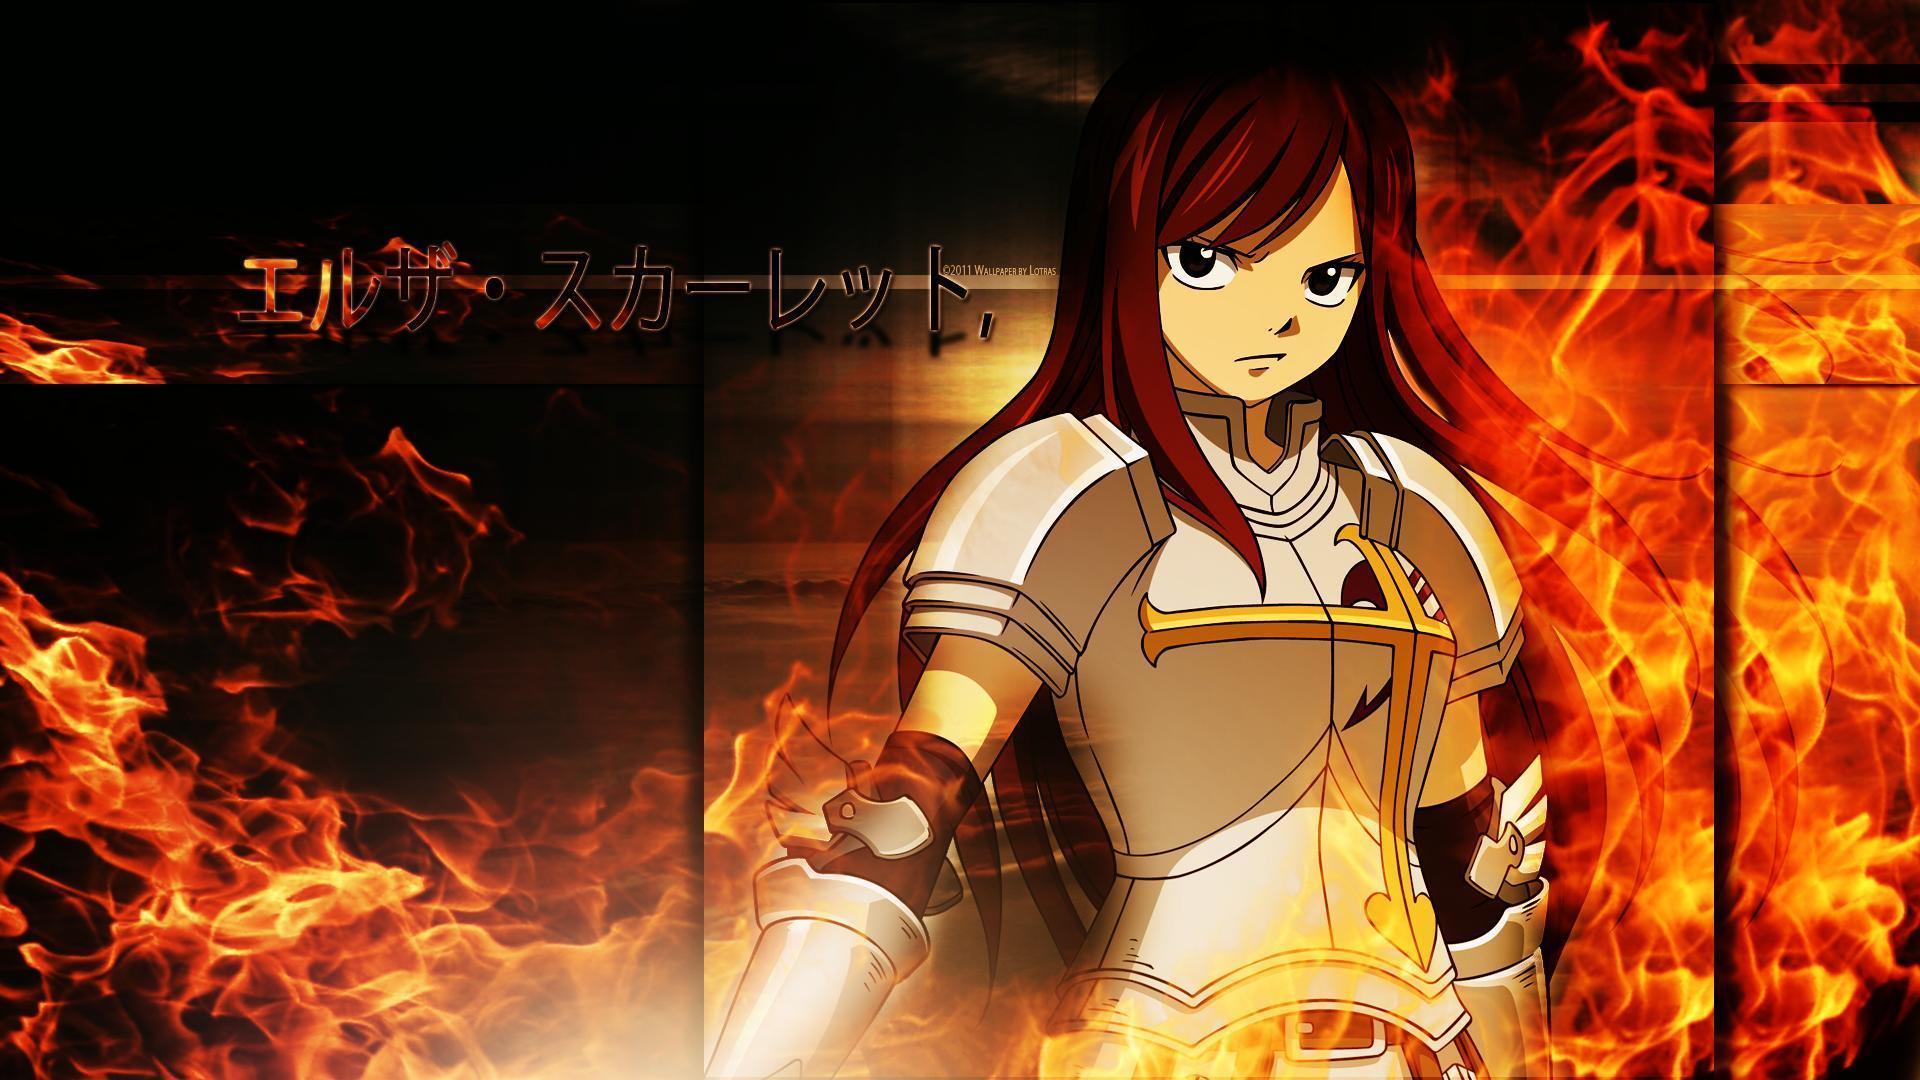 Wallpapers For > Fairy Tail Erza Wallpapers